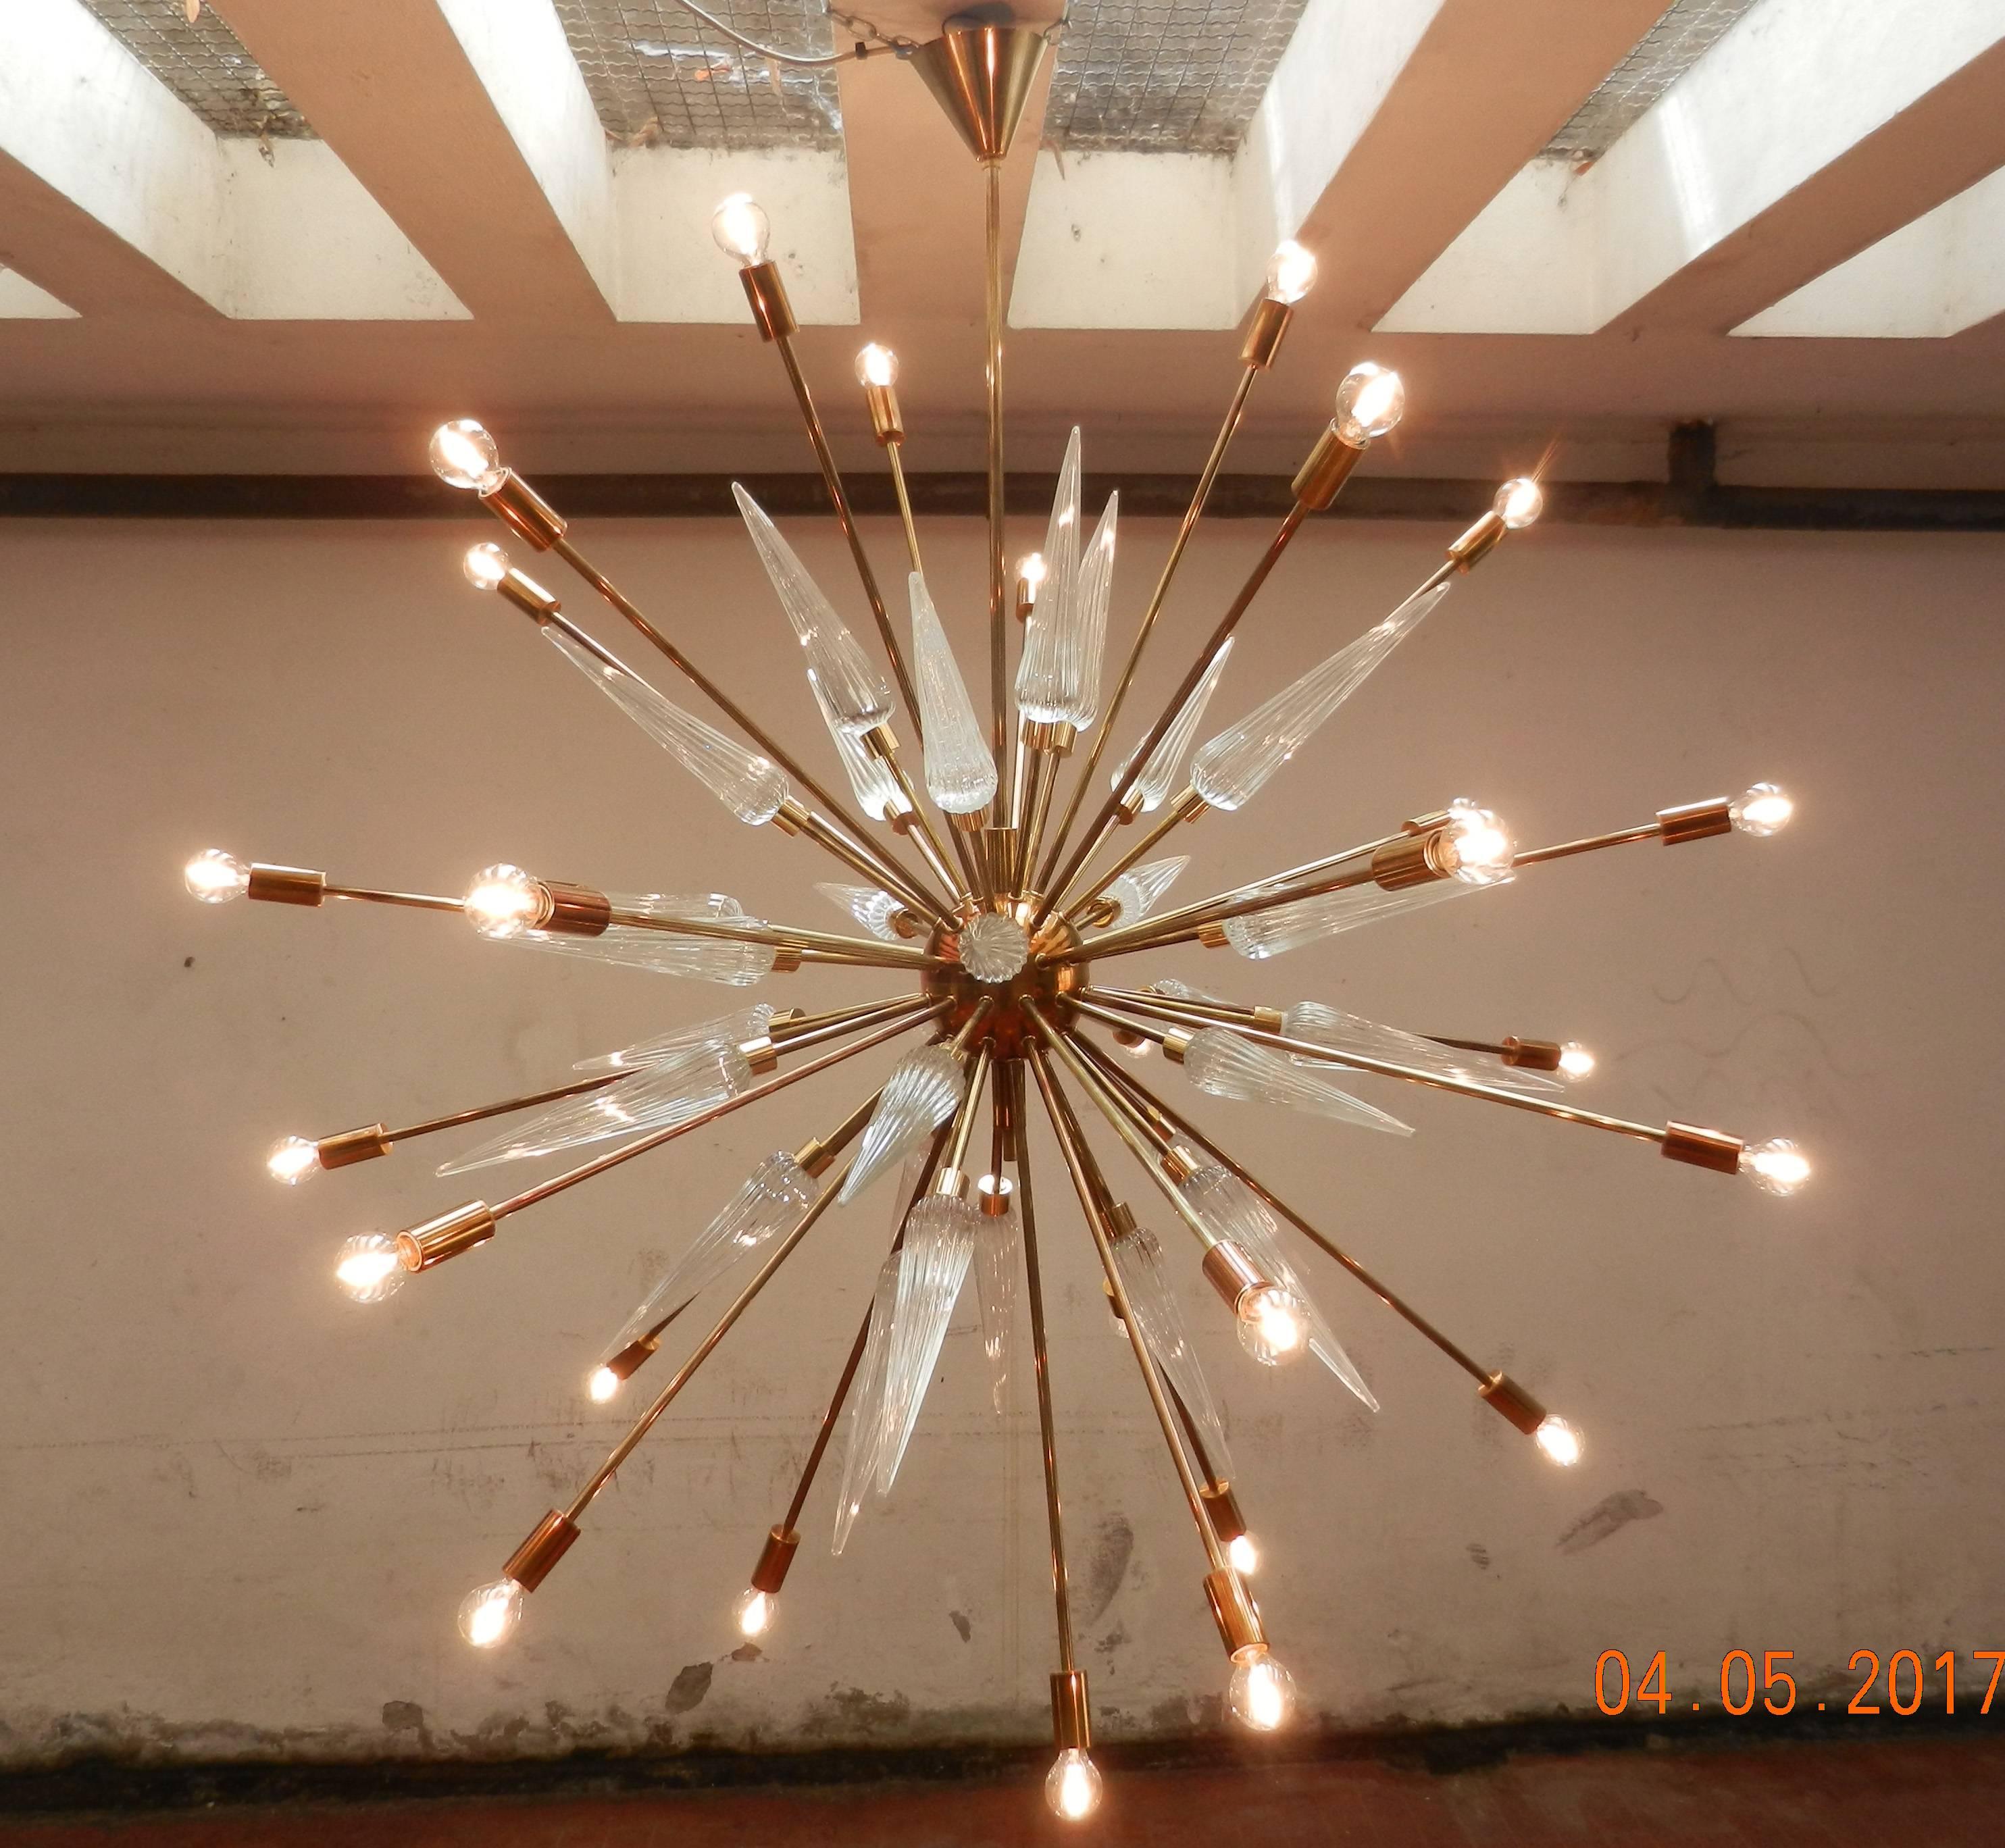 A Sputnik Murano glass chandelier, made with patinated brass and 30 Murano spiked cones with ridges generating from a brass centre ball.
Thirty-light fixtures generating from brass metal spikes.
Diameter 125 cm
The overall height 135 (cm can be